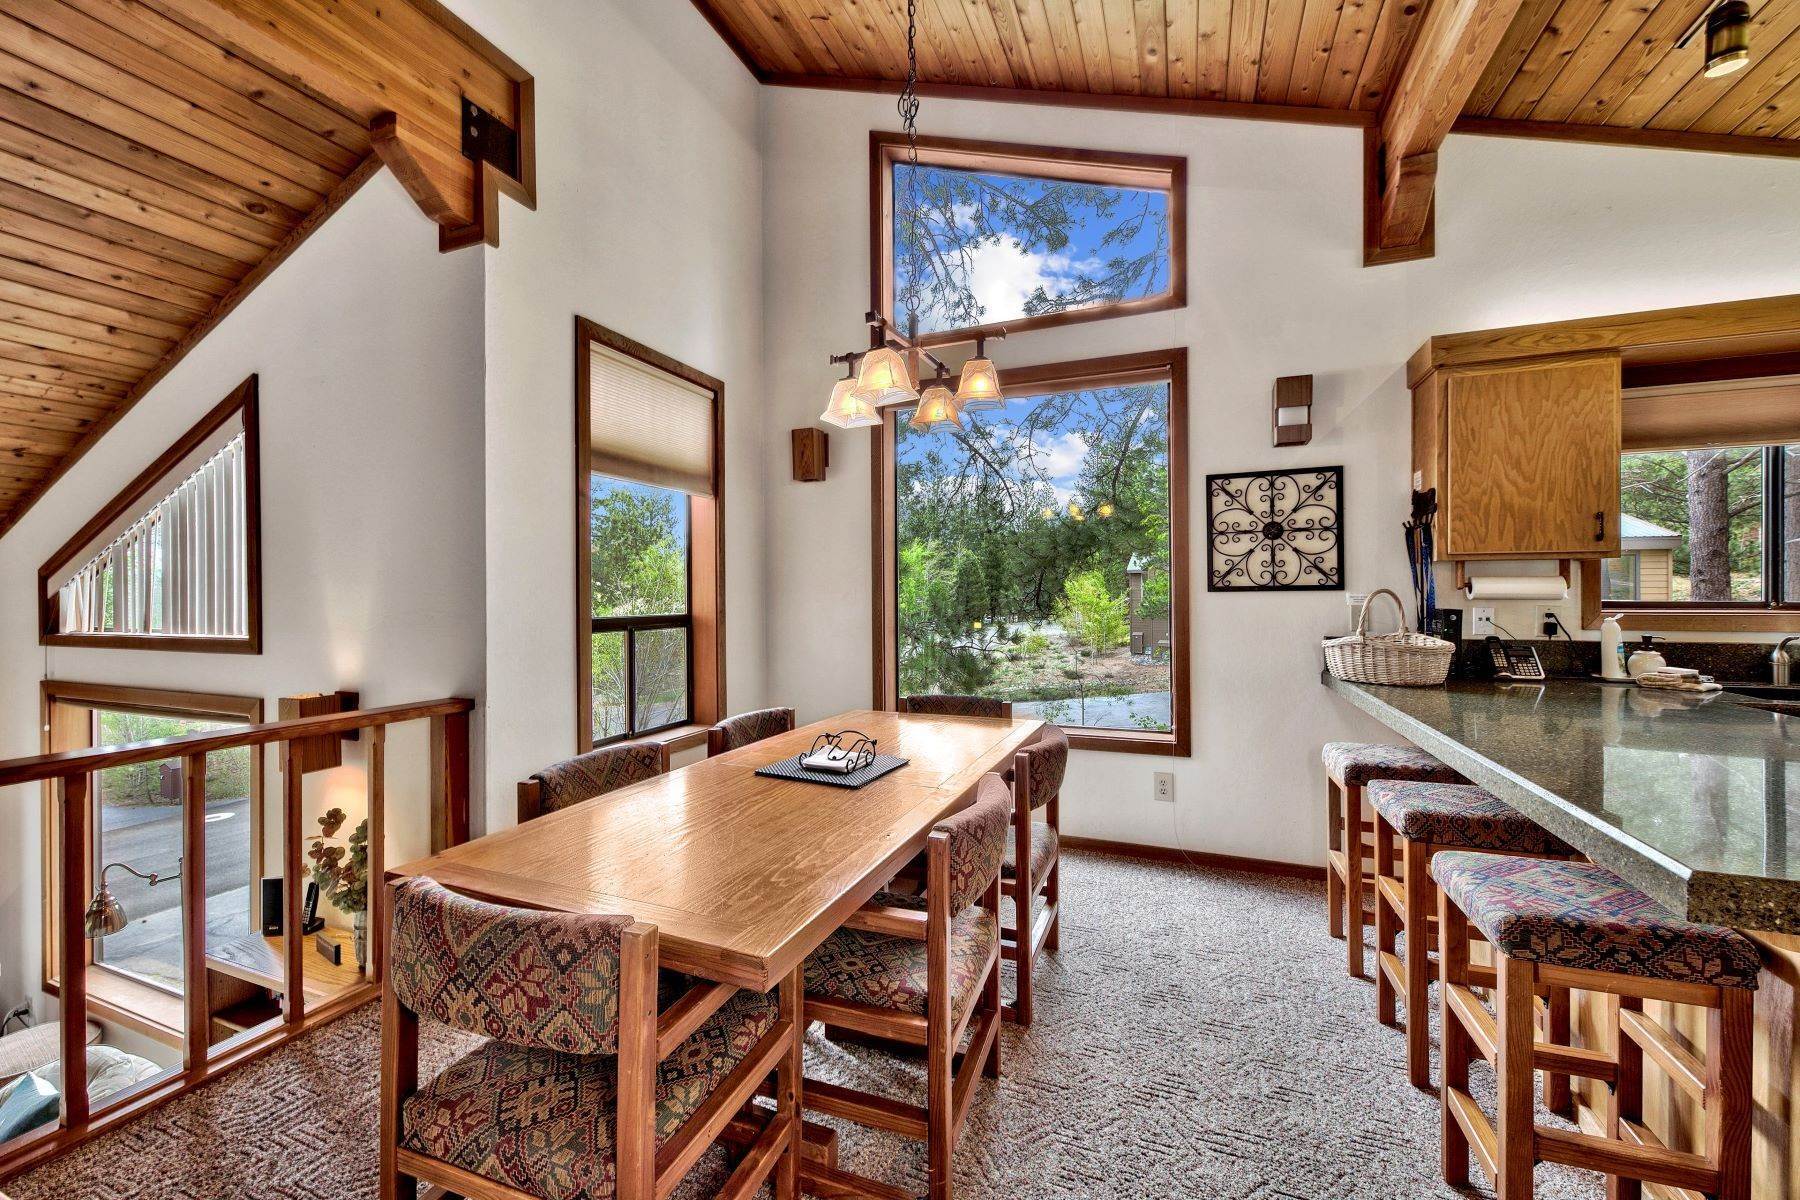 14. Fractional Ownership Property for Active at Ideal Vacation Cabin in Northstar 253 Basque Dr Truckee, California 96161 United States